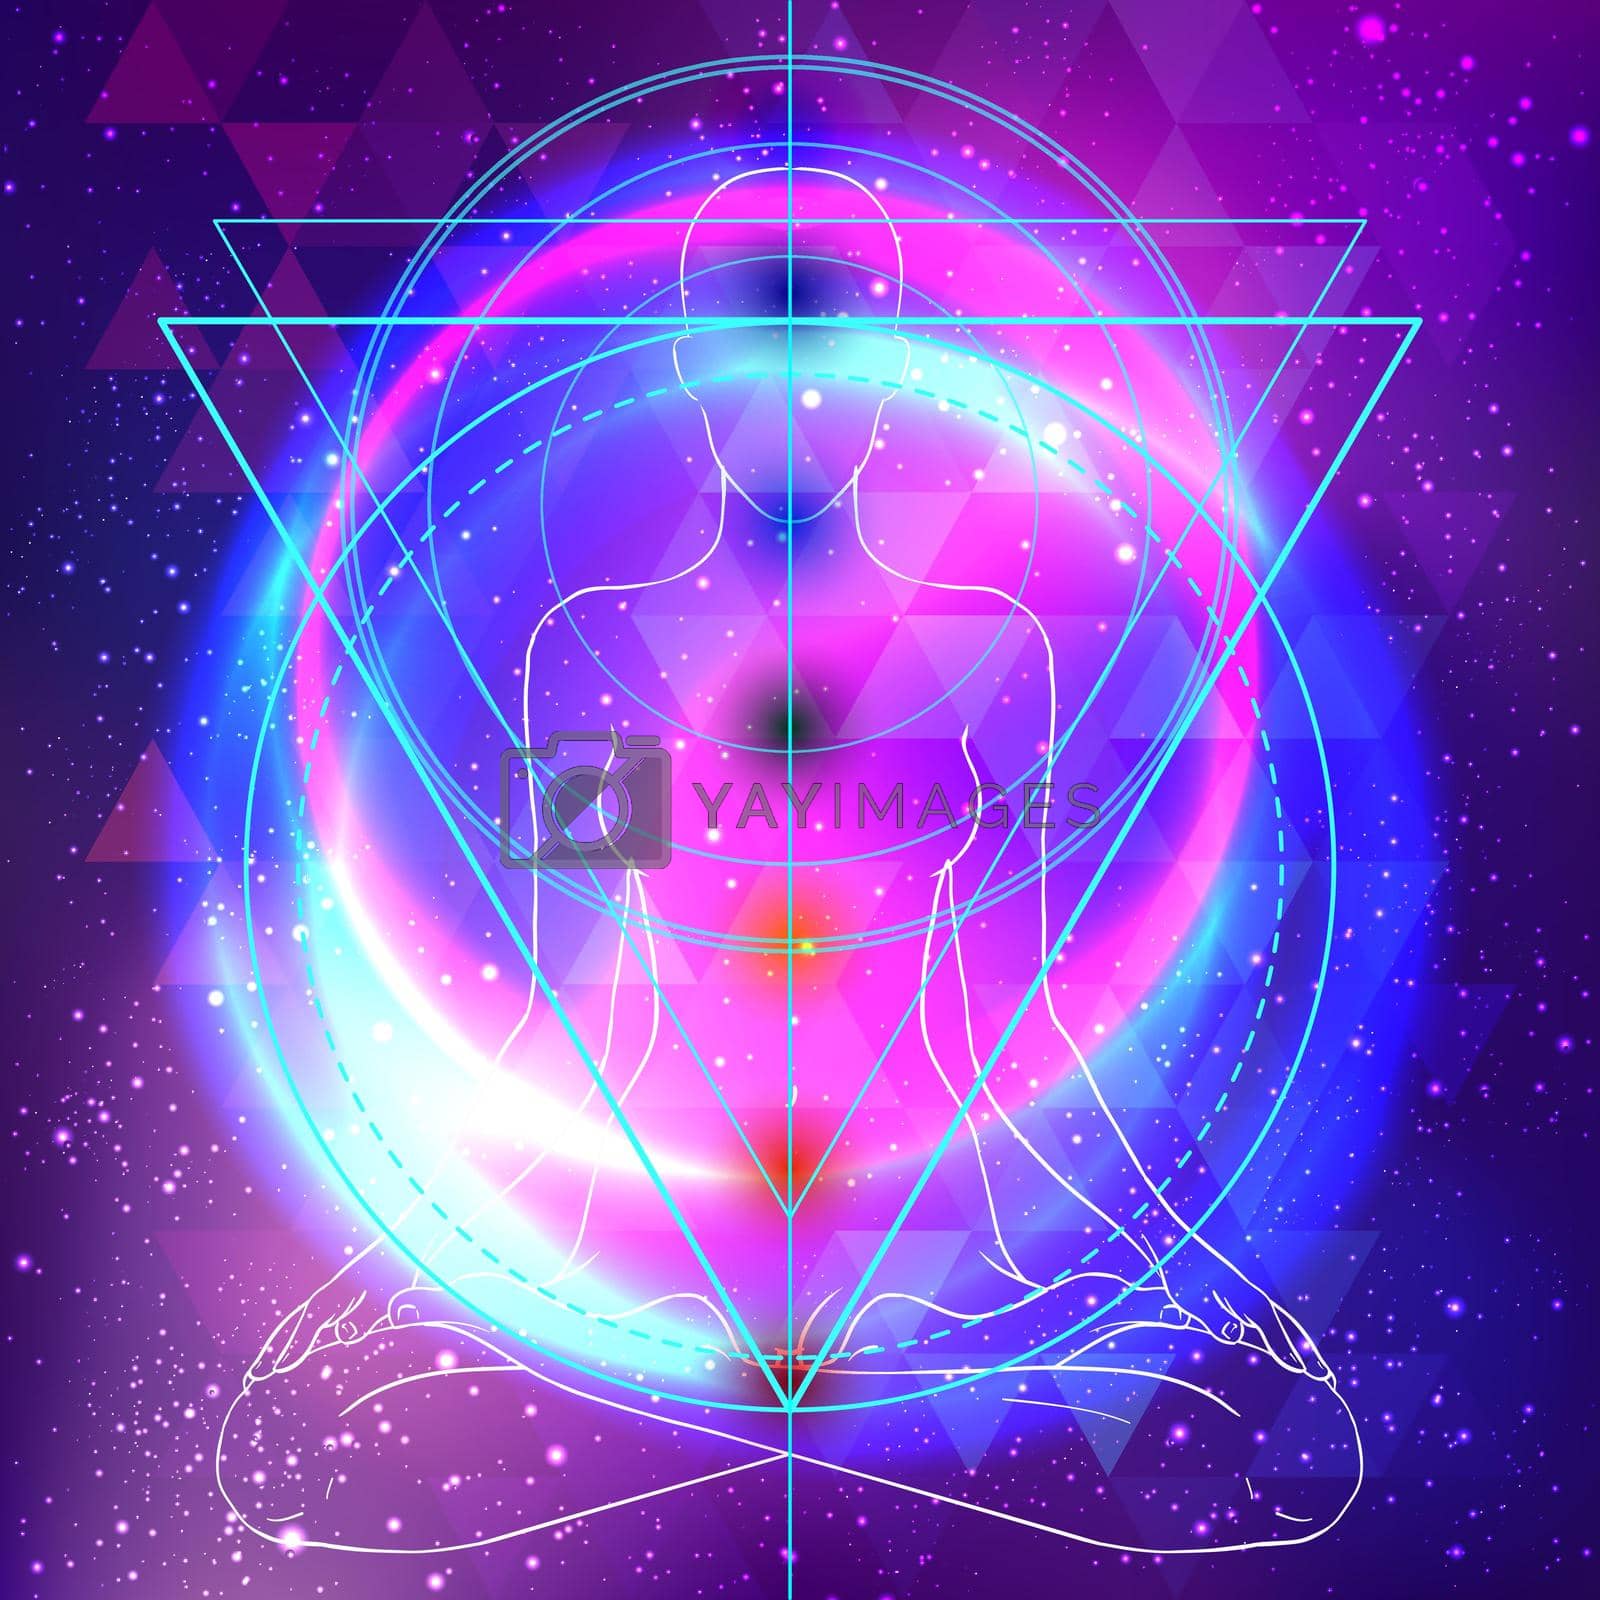 Royalty free image of Sacred geometry abstract background. Good design for textile t-shirt print, flyer and poster background. Futuristic vector illustration in bright neon colors. by varka